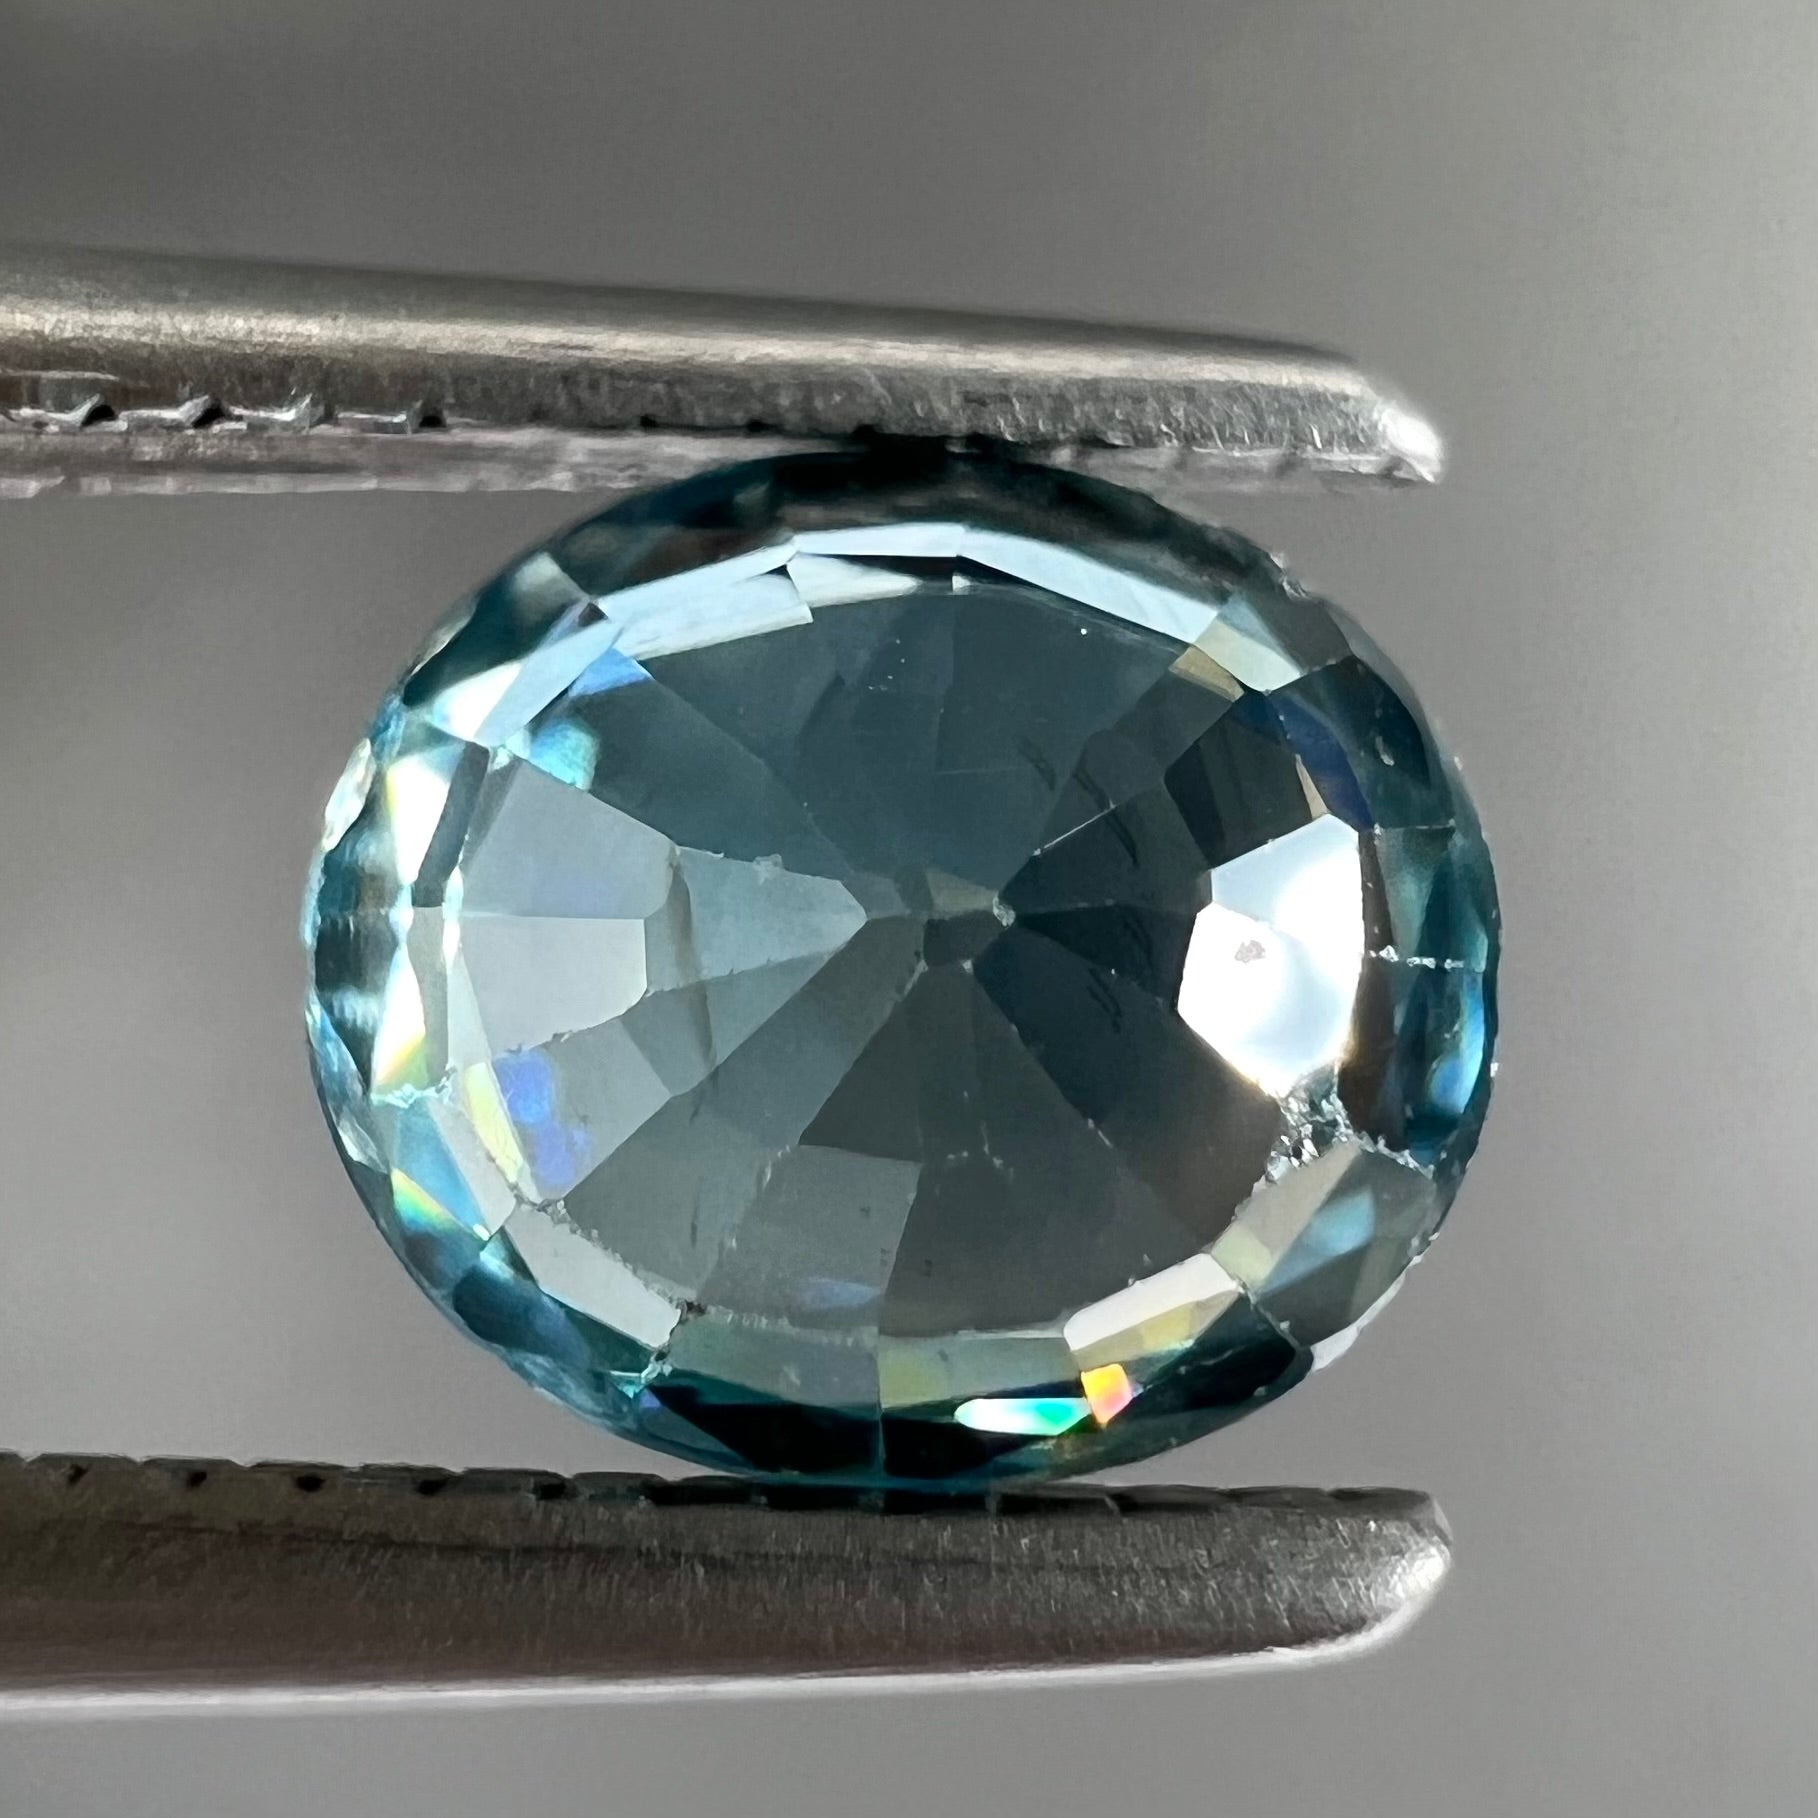 A loose, faceted oval cut blue zircon gemstone.